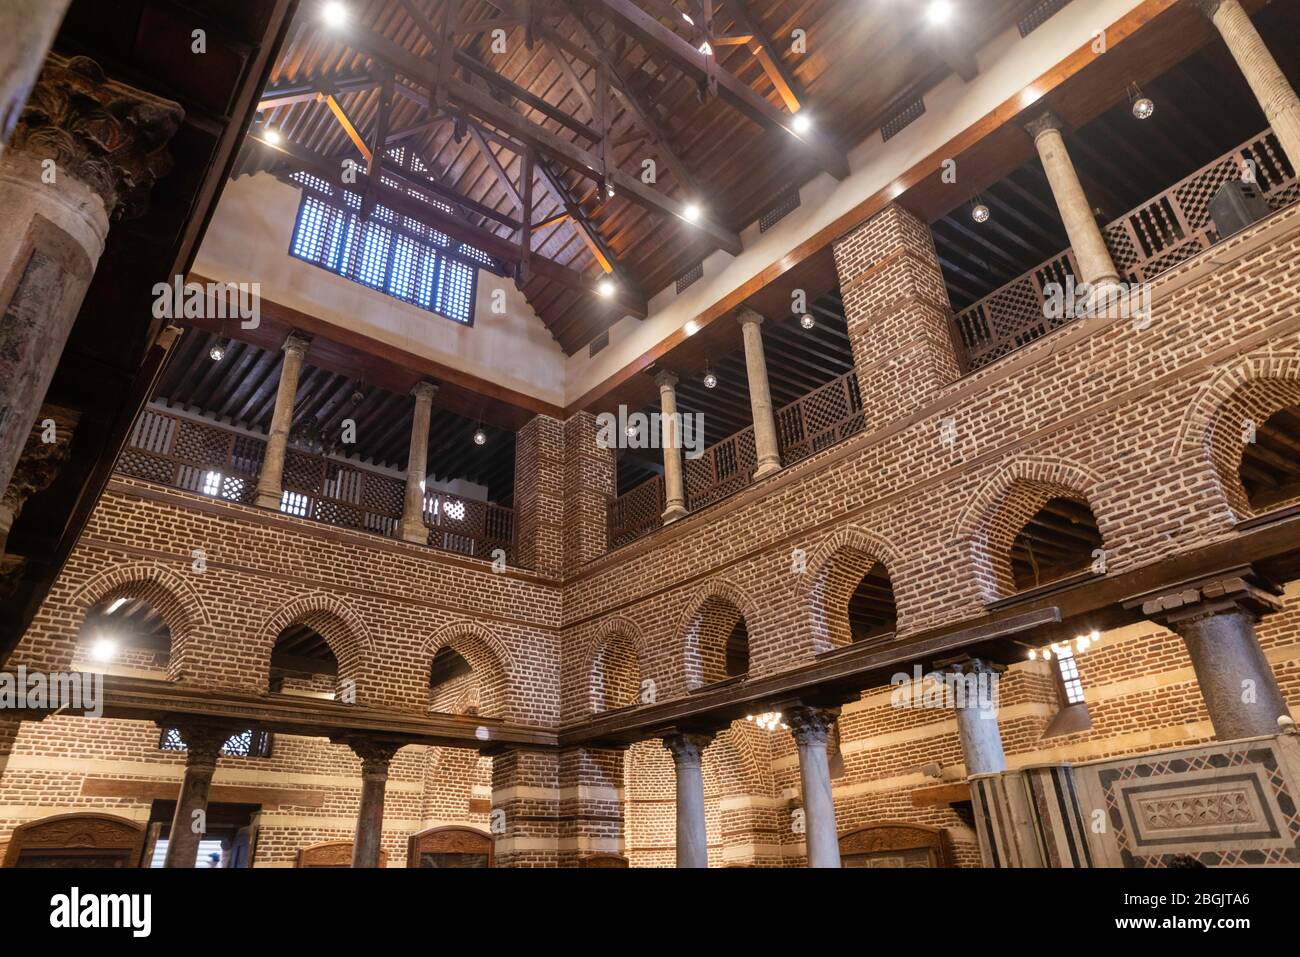 Interior view of Saints Sergius and Bacchus Church, Kom Ghorab, Old Cairo, Egypt. Stock Photo